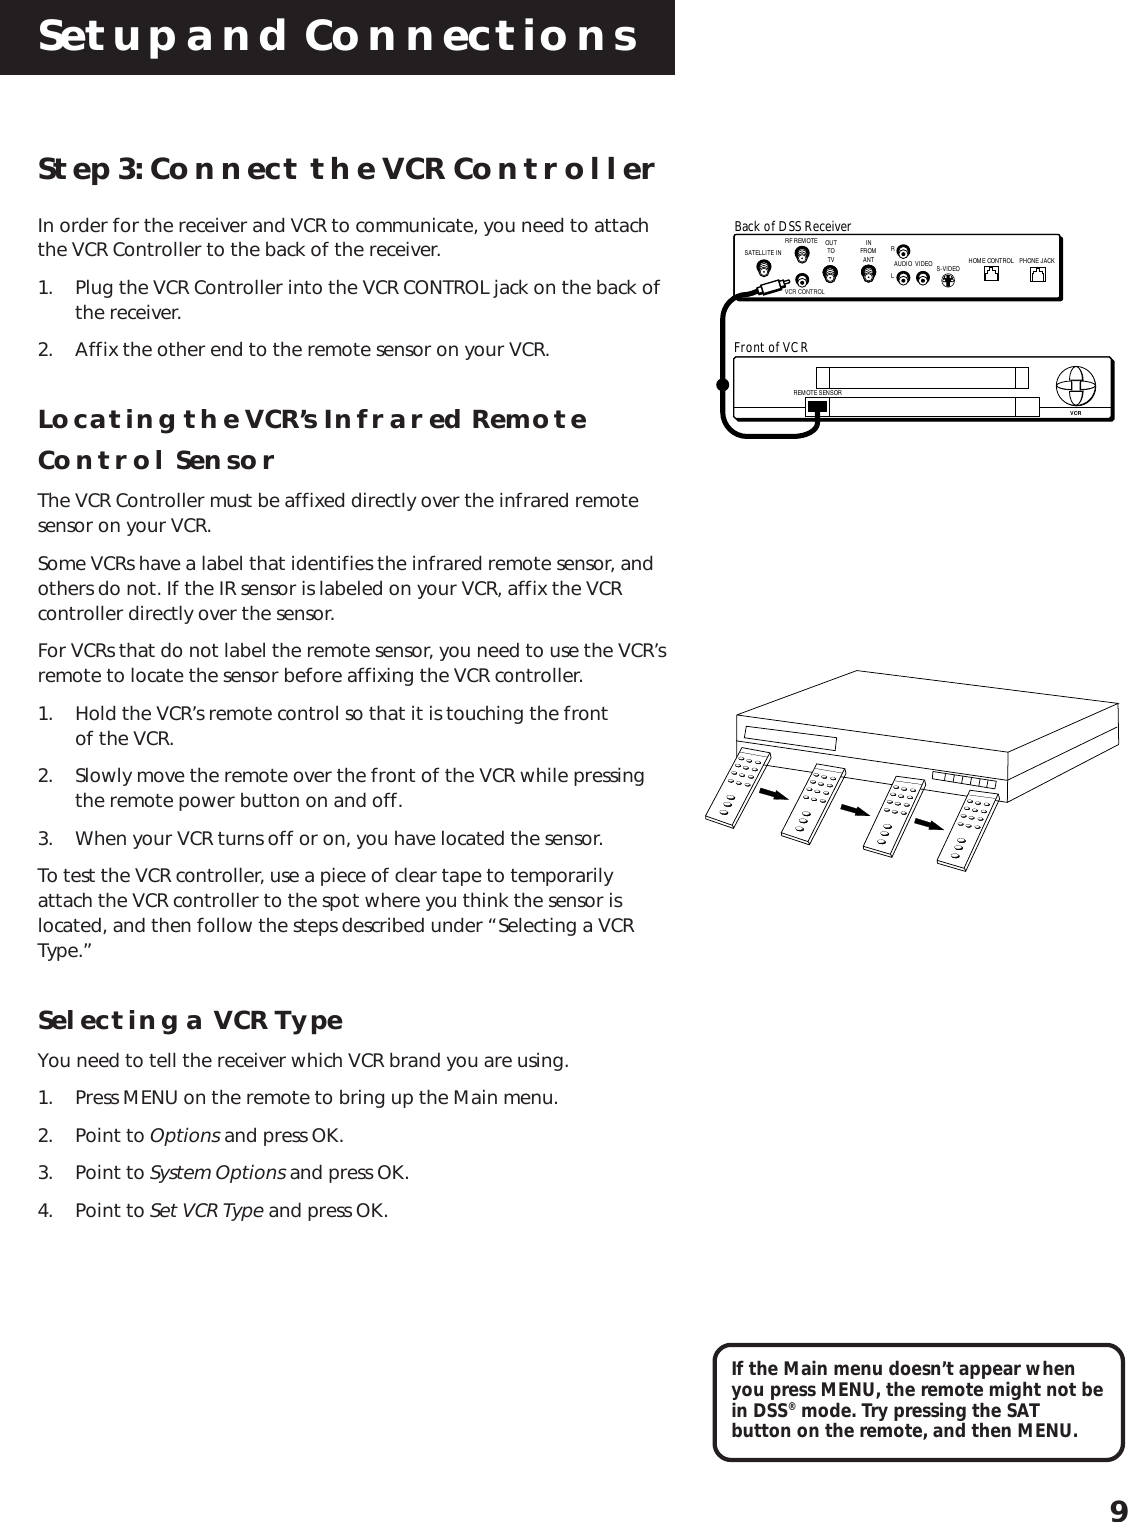 Setup and Connections9Step 3: Connect the VCR ControllerIn order for the receiver and VCR to communicate, you need to attachthe VCR Controller to the back of the receiver.1. Plug the VCR Controller into the VCR CONTROL jack on the back ofthe receiver.2. Affix the other end to the remote sensor on your VCR.Locating the VCR’s Infrared RemoteControl SensorThe VCR Controller must be affixed directly over the infrared remotesensor on your VCR.Some VCRs have a label that identifies the infrared remote sensor, andothers do not. If the IR sensor is labeled on your VCR, affix the VCRcontroller directly over the sensor.For VCRs that do not label the remote sensor, you need to use the VCR’sremote to locate the sensor before affixing the VCR controller.1. Hold the VCR’s remote control so that it is touching the frontof the VCR.2. Slowly move the remote over the front of the VCR while pressingthe remote power button on and off.3. When your VCR turns off or on, you have located the sensor.To test the VCR controller, use a piece of clear tape to temporarilyattach the VCR controller to the spot where you think the sensor islocated, and then follow the steps described under “Selecting a VCRType.”Selecting a VCR TypeYou need to tell the receiver which VCR brand you are using.1. Press MENU on the remote to bring up the Main menu.2. Point to Options and press OK.3. Point to System Options and press OK.4. Point to Set VCR Type and press OK.If the Main menu doesn’t appear whenyou press MENU, the remote might not bein DSS® mode. Try pressing the SATbutton on the remote, and then MENU.REMOTE SENSORVCRFront of VCRBack of DSS ReceiverSATELLITE IN OUTTOTVRF REMOTES-VIDEOVIDEORLAUDIO HOME CONTROLVCR CONTROLINFROMANT PHONE JACK